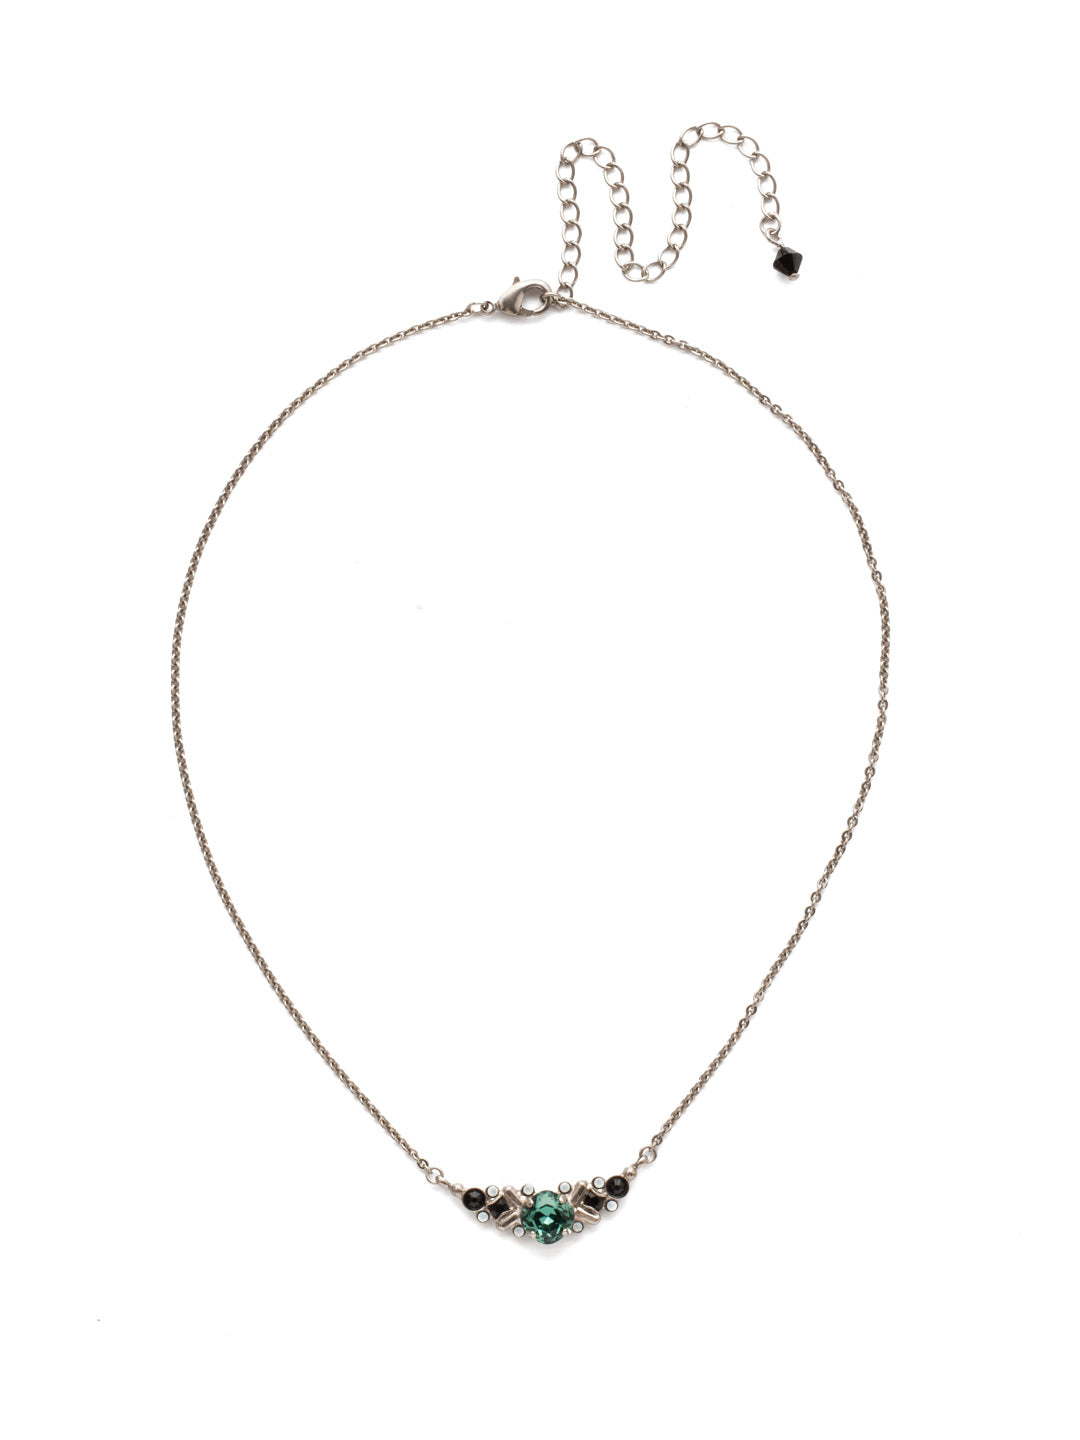 Araila Pendant Necklace - NDX3ASGDG - A small round cushion cut stone with metal details takes center stage while small rounds provide a delicate accent. From Sorrelli's Game Day Green collection in our Antique Silver-tone finish.